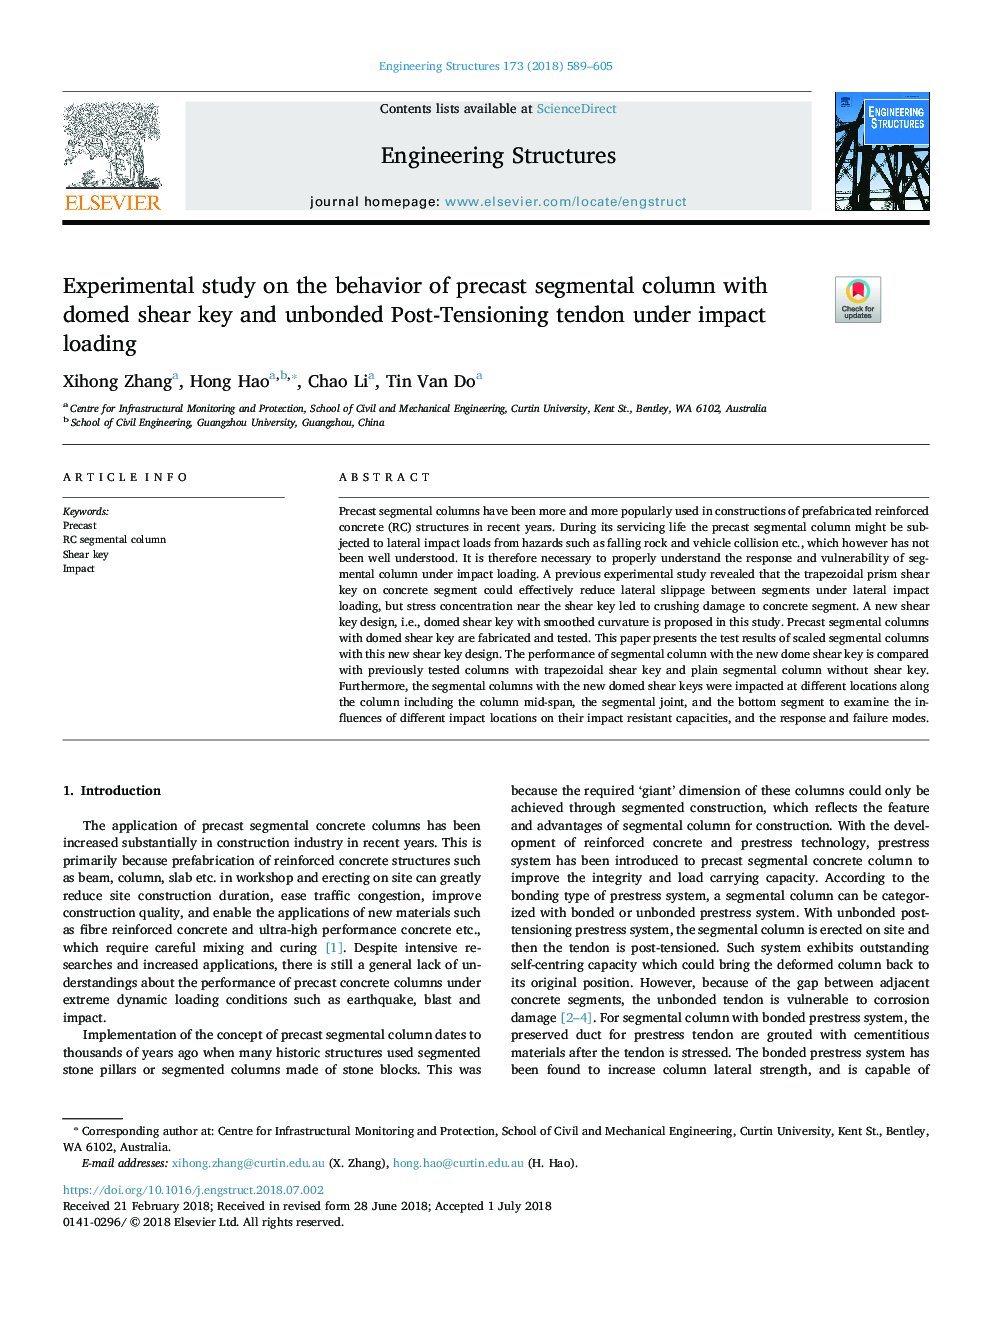 Experimental study on the behavior of precast segmental column with domed shear key and unbonded Post-Tensioning tendon under impact loading